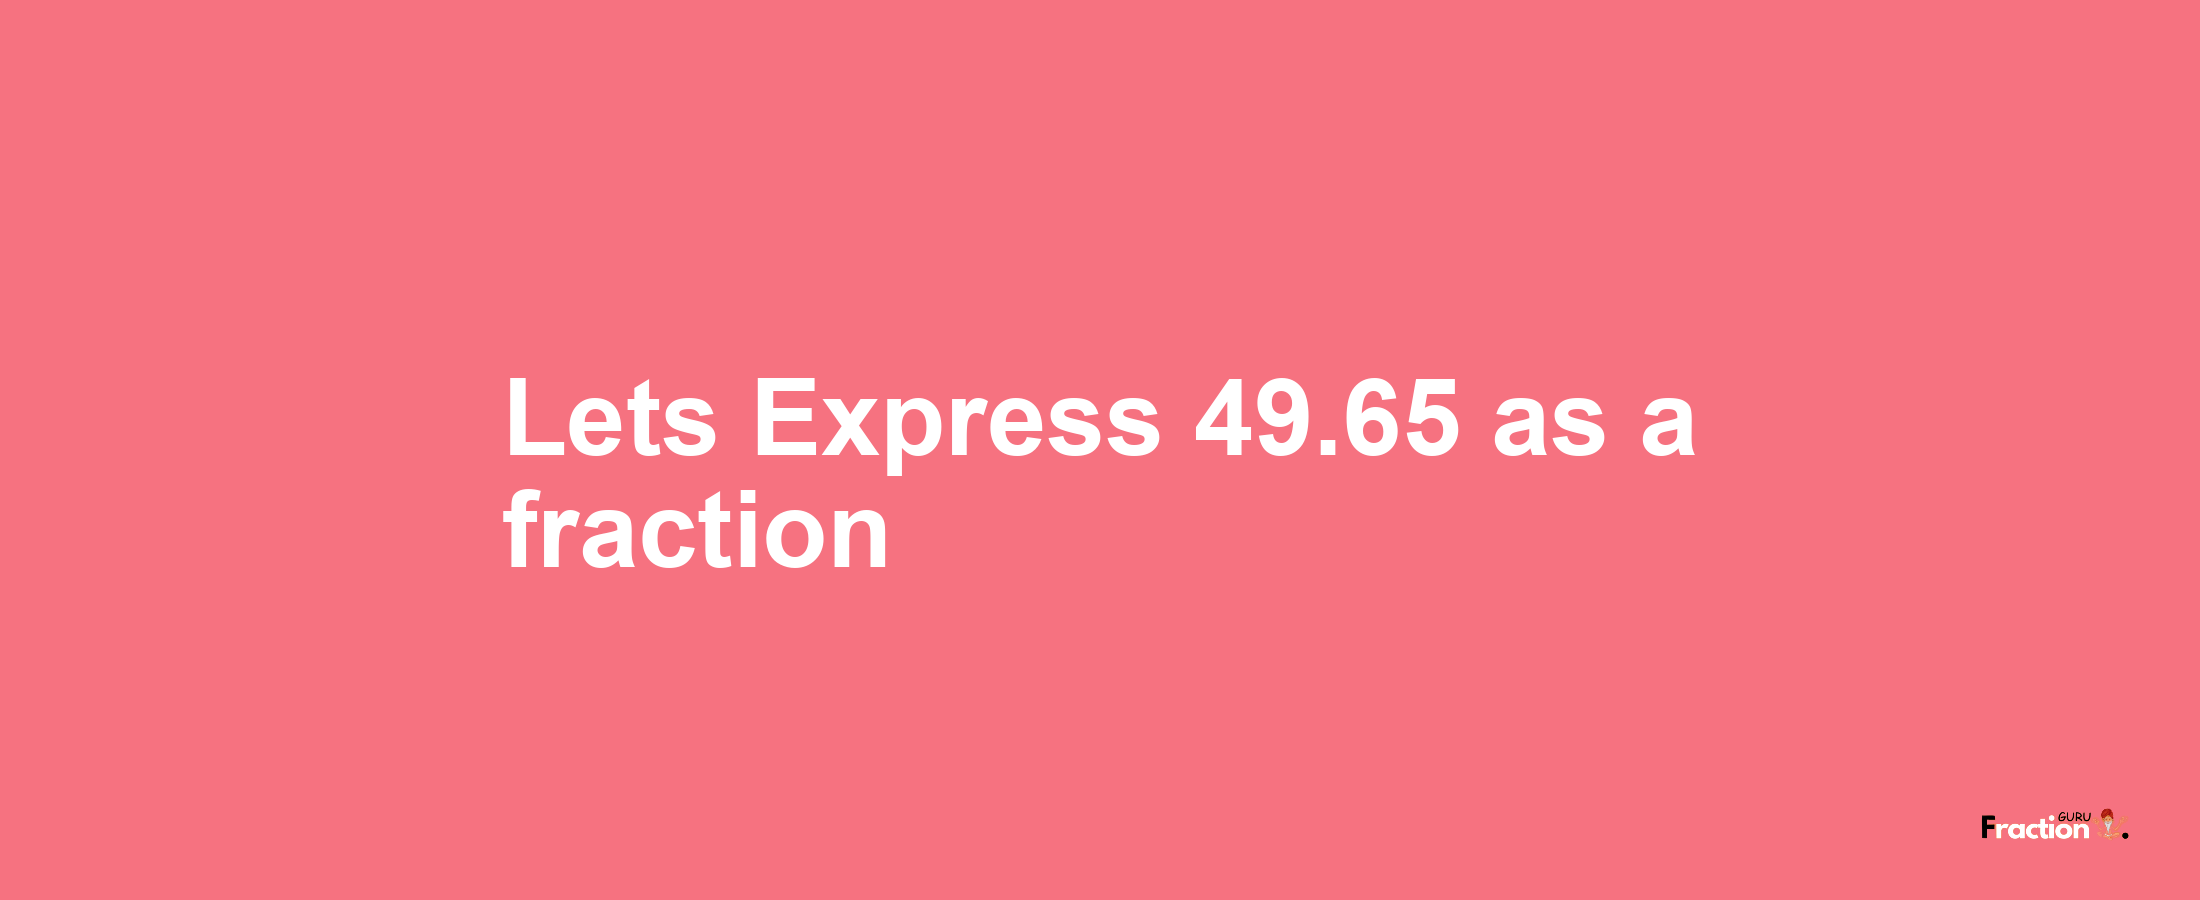 Lets Express 49.65 as afraction